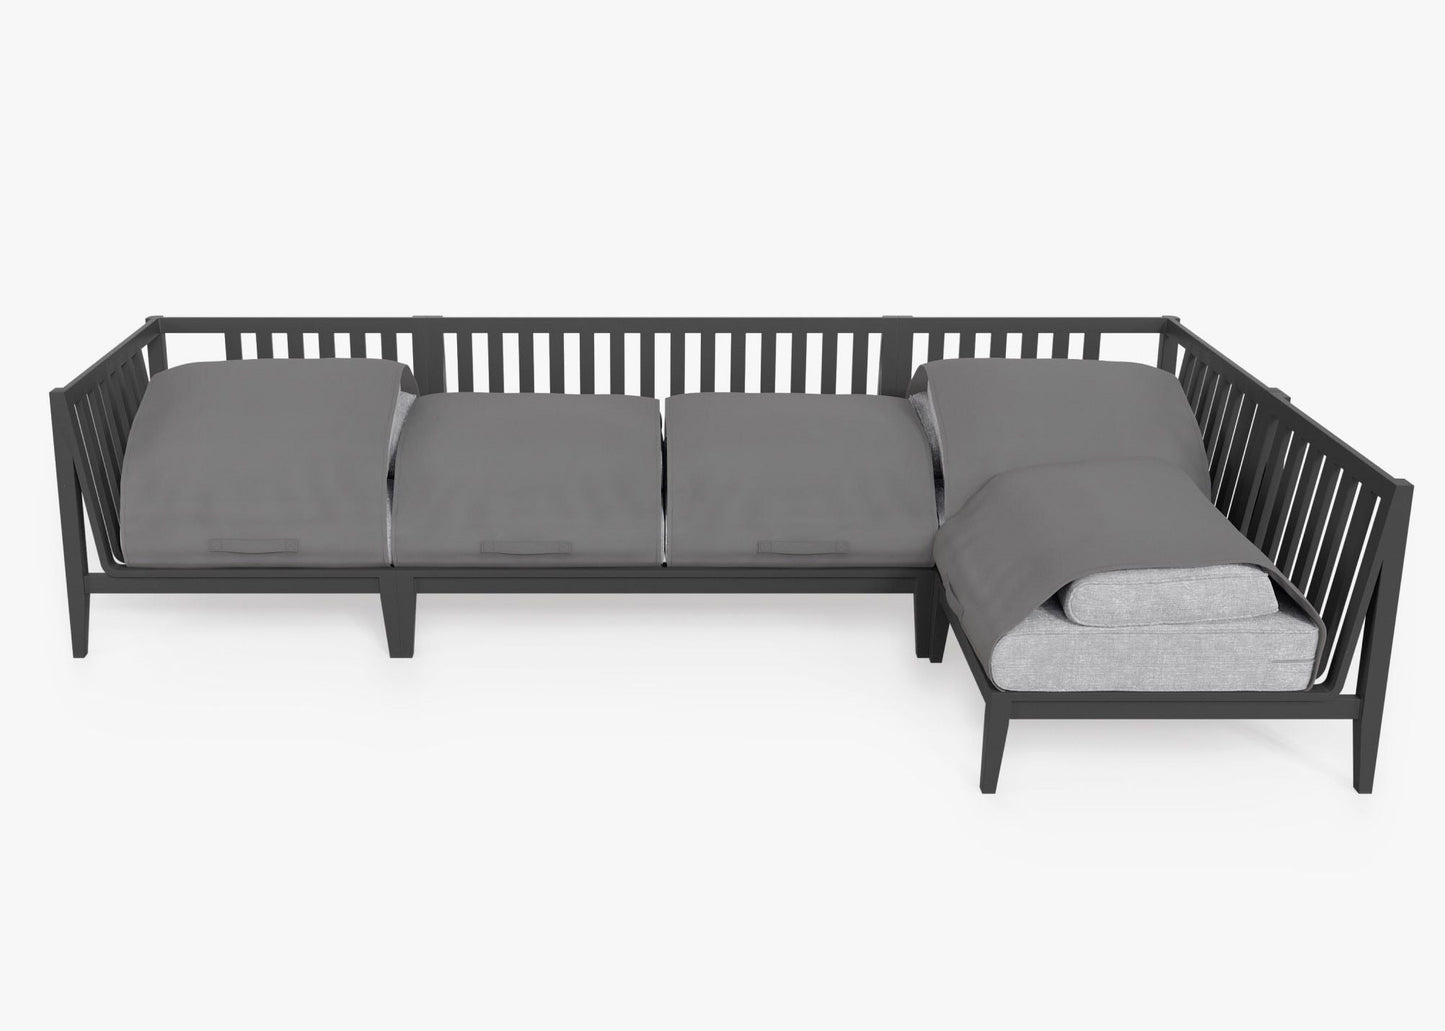 Live Outer 127" x 64" Charcoal Aluminum Outdoor L Shape Sectional 5-Seat With Pacific Fog Gray Cushion